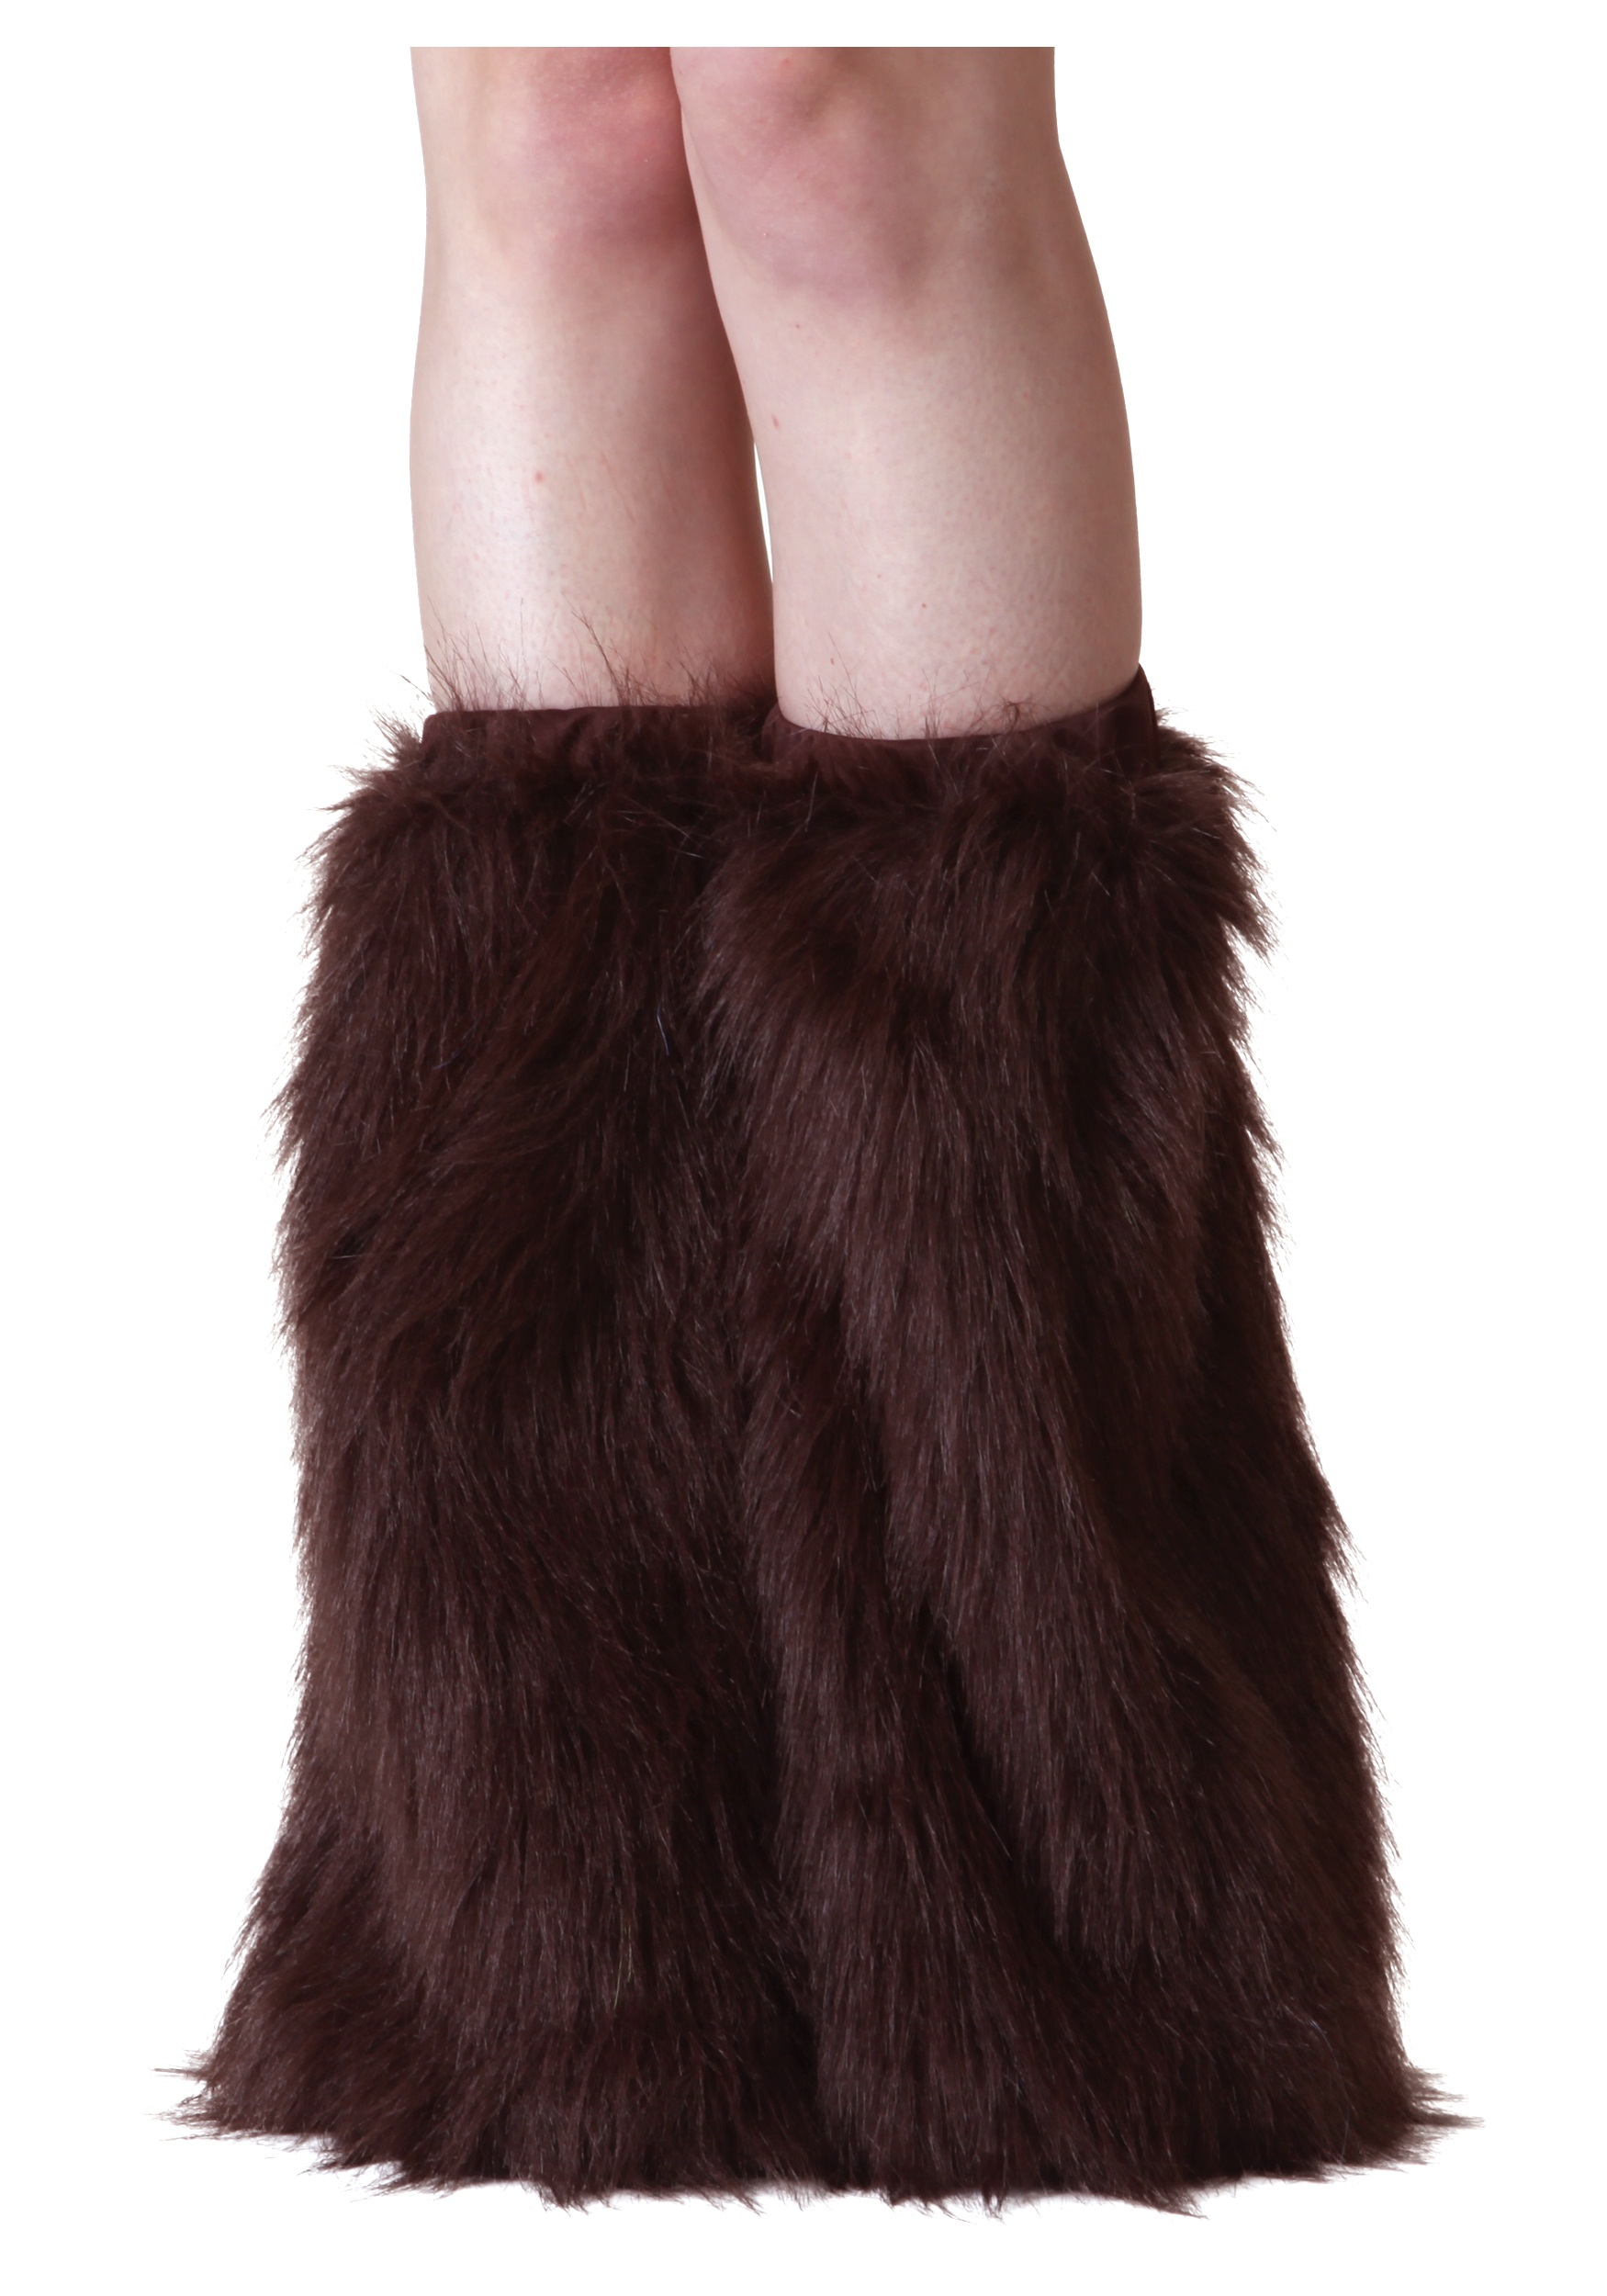 Brown Furry Boot Covers Adult